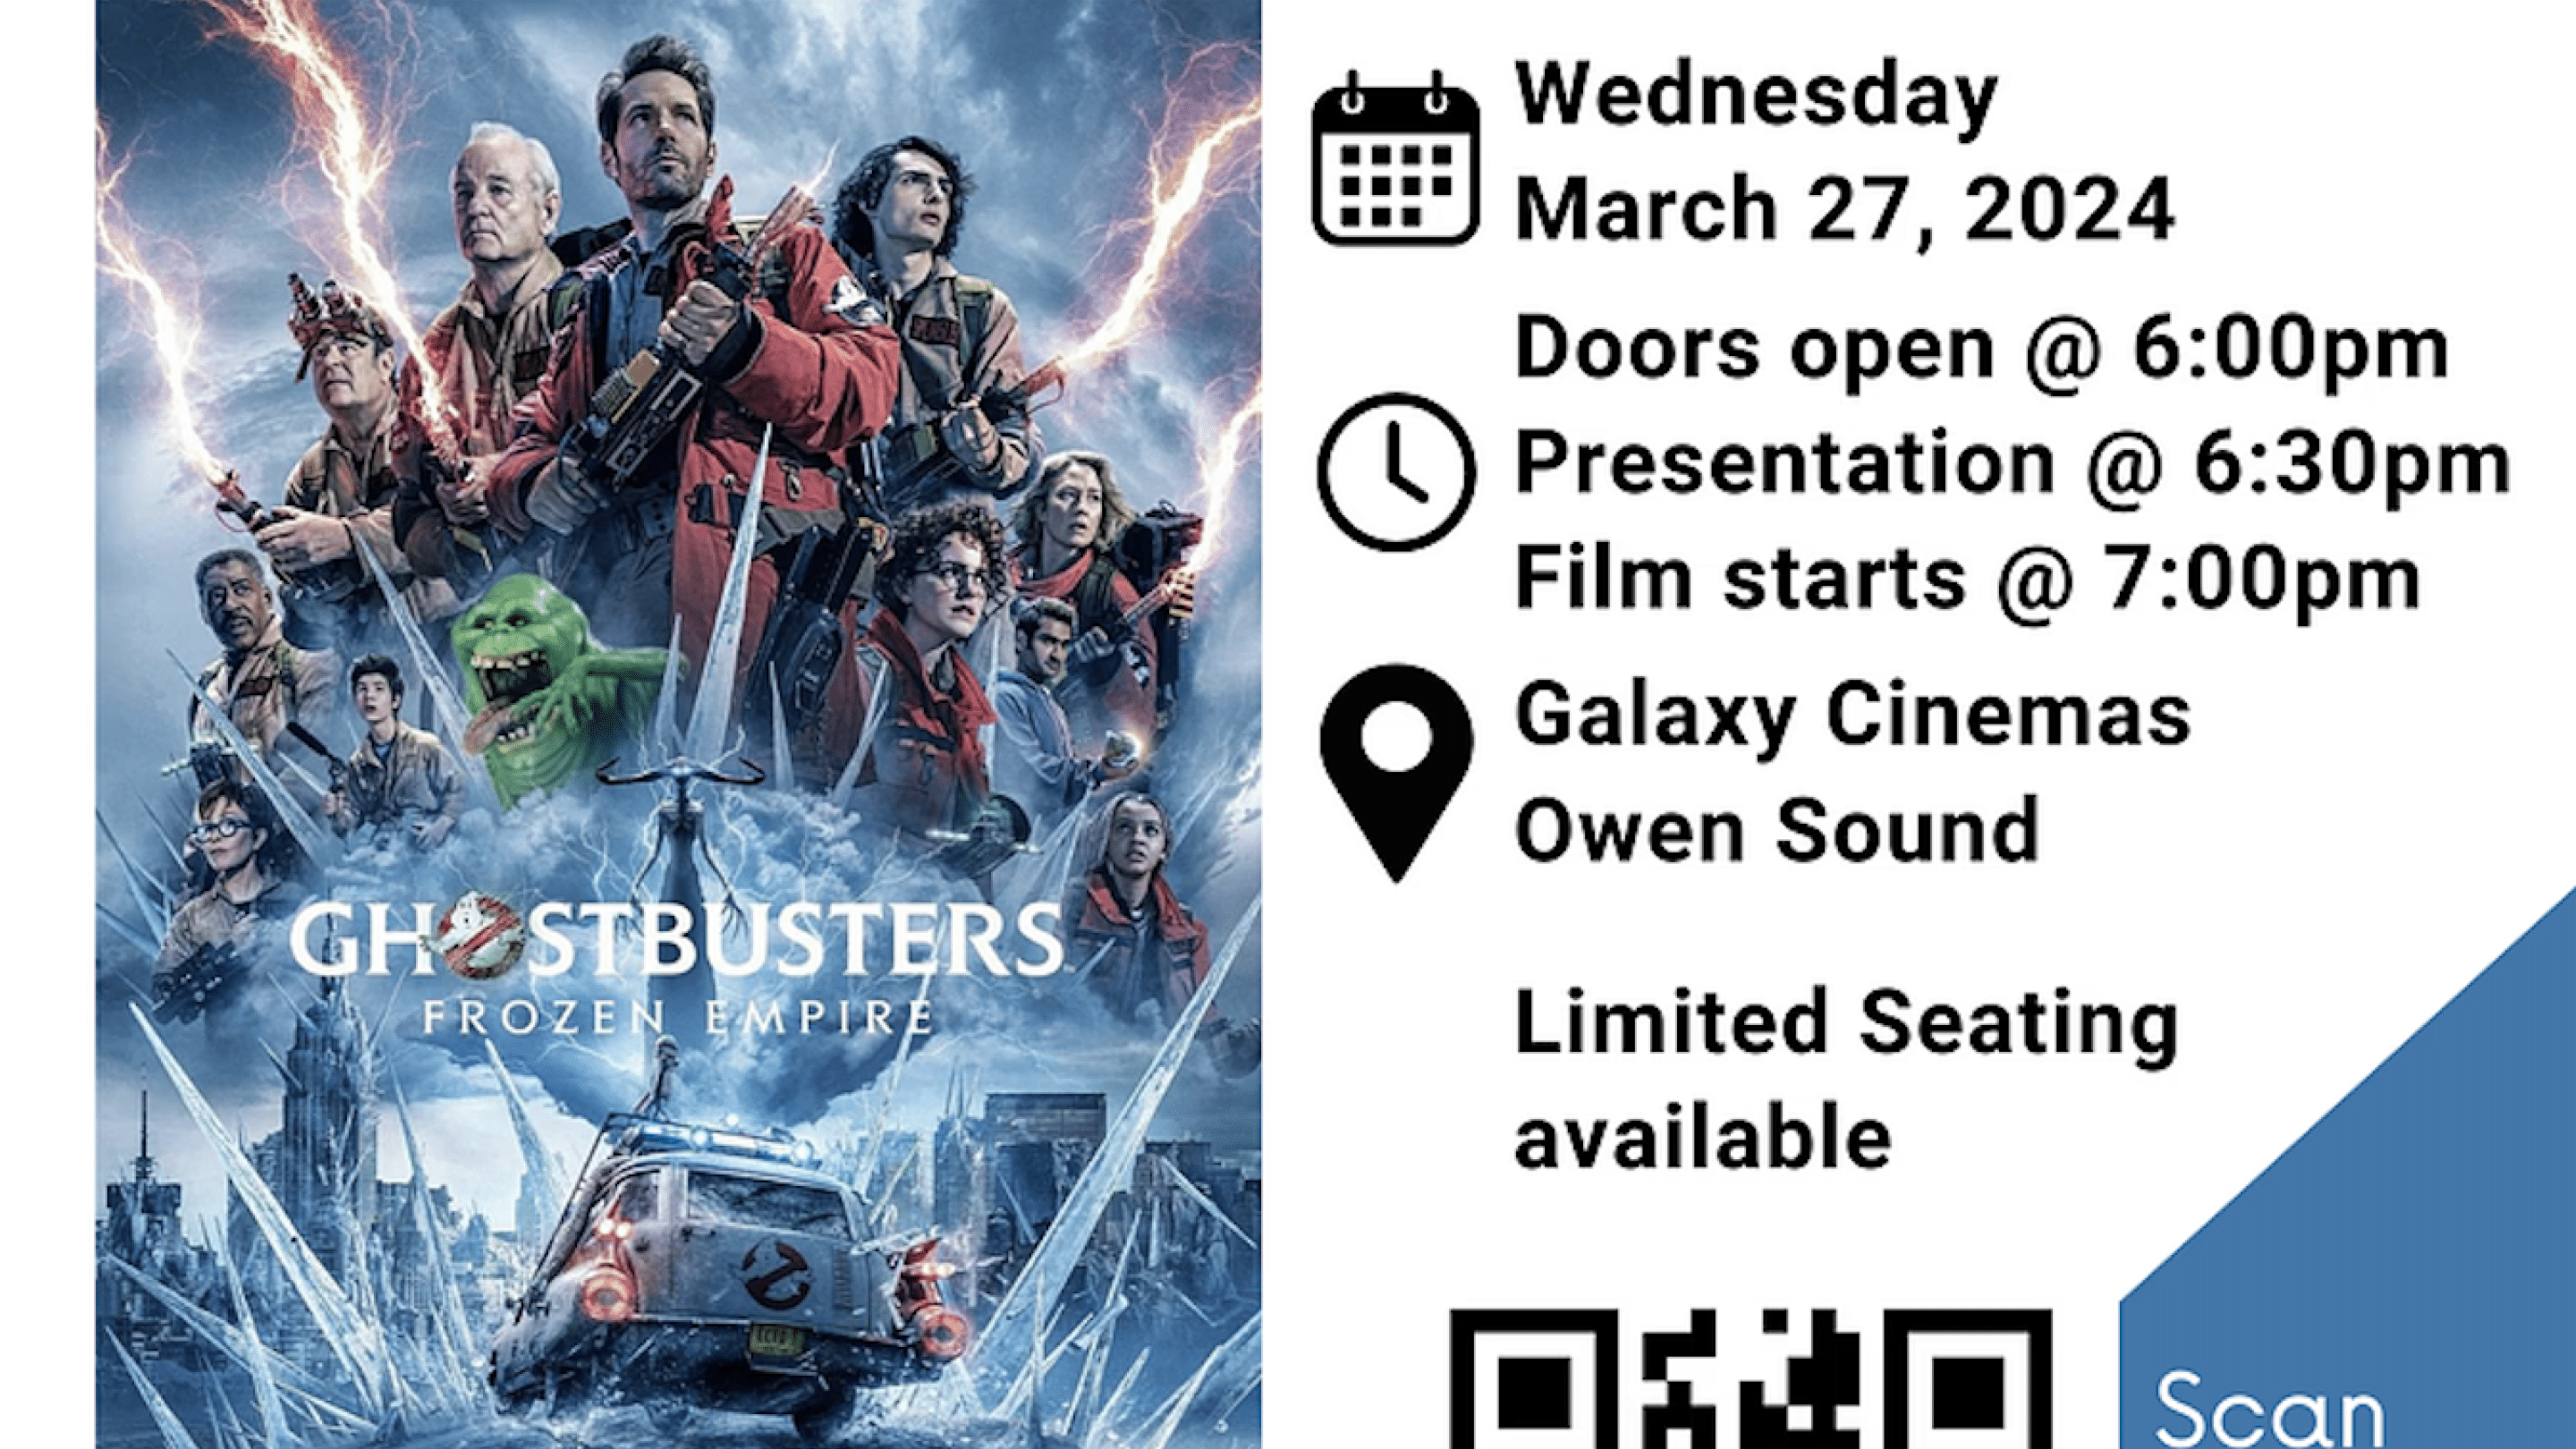 NWMO Ghostbusters: Frozen Empire Screening - Wednesday, March 27, 2024 @ 6:00PM, location: Owen Sound Galaxy